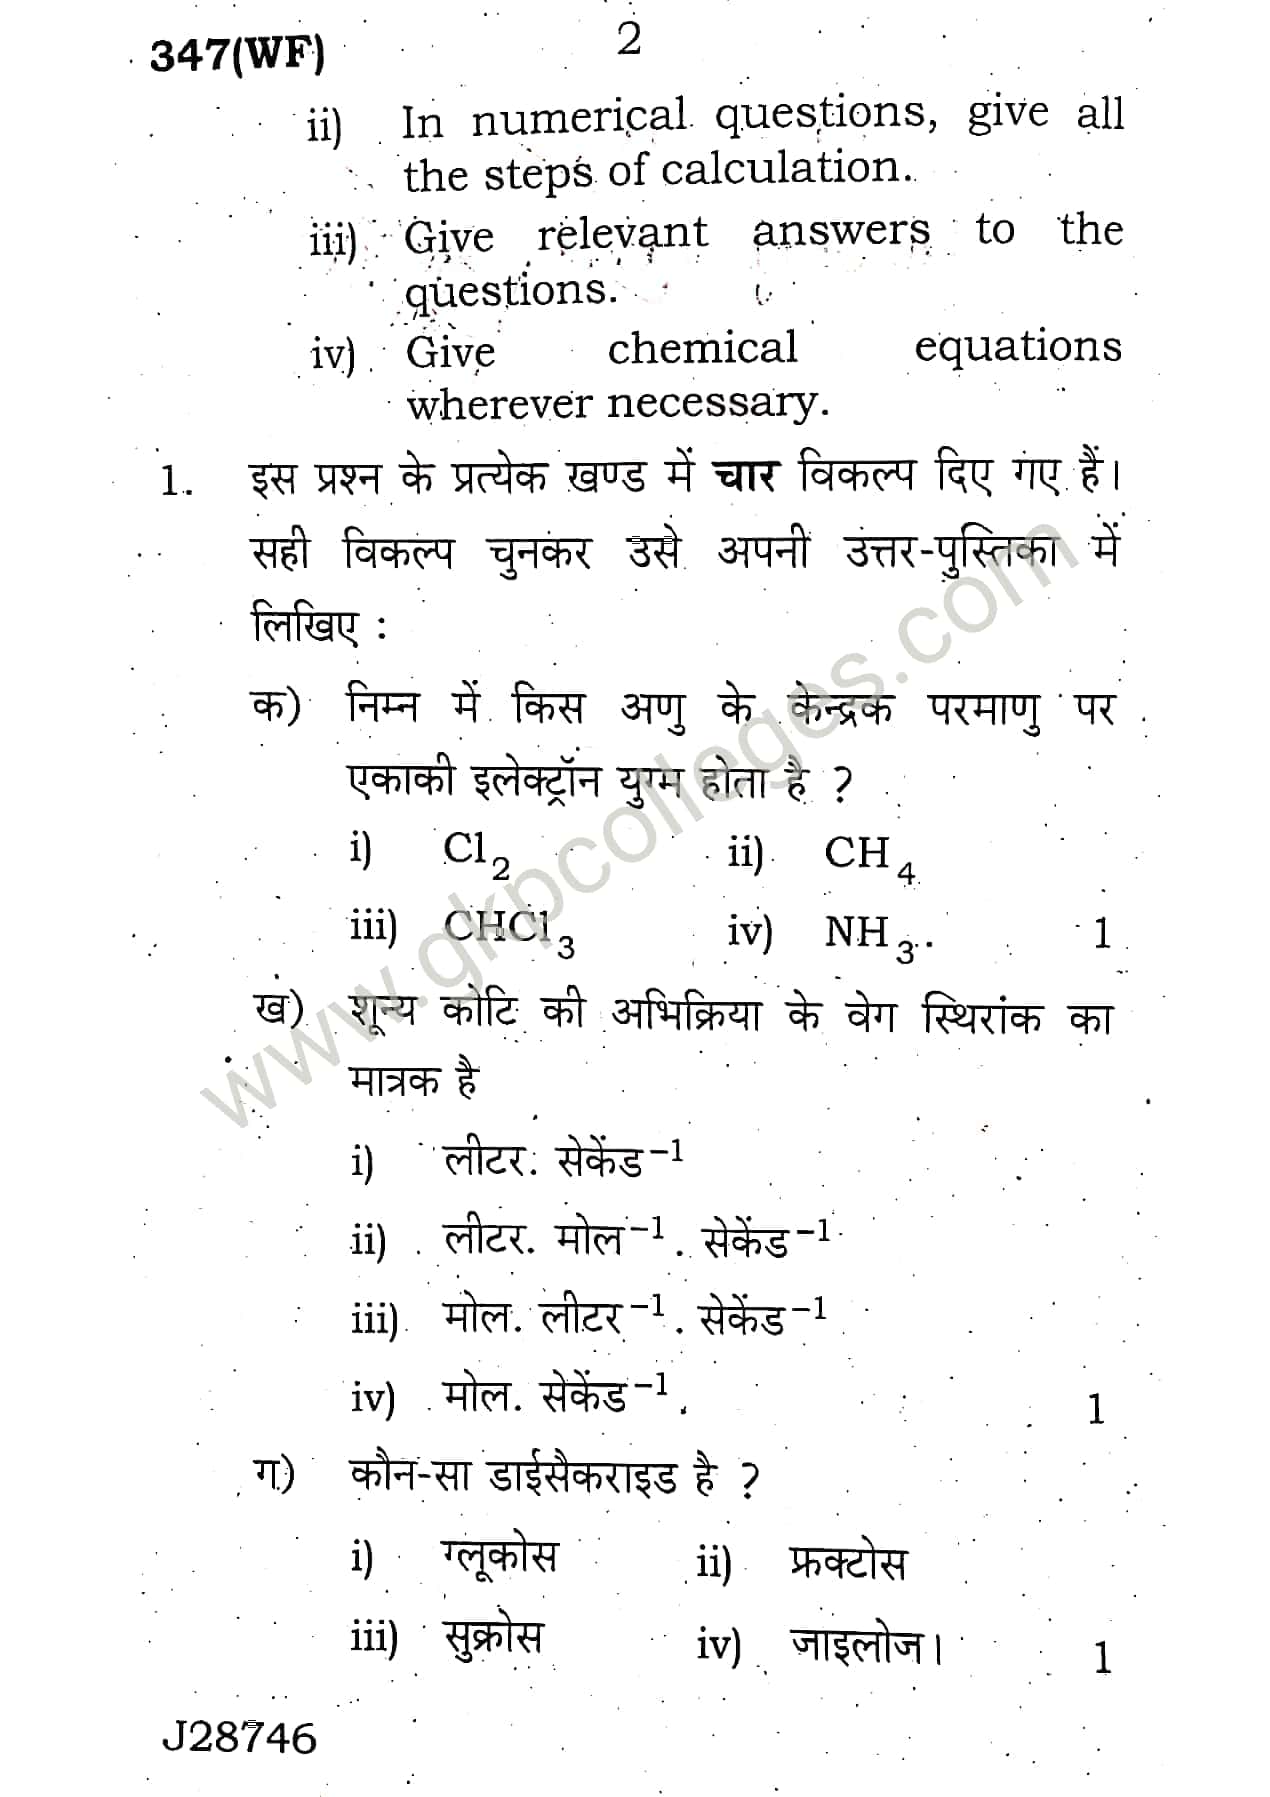 Chemistry, UP Board Question Paper for 12th of Examination 2020